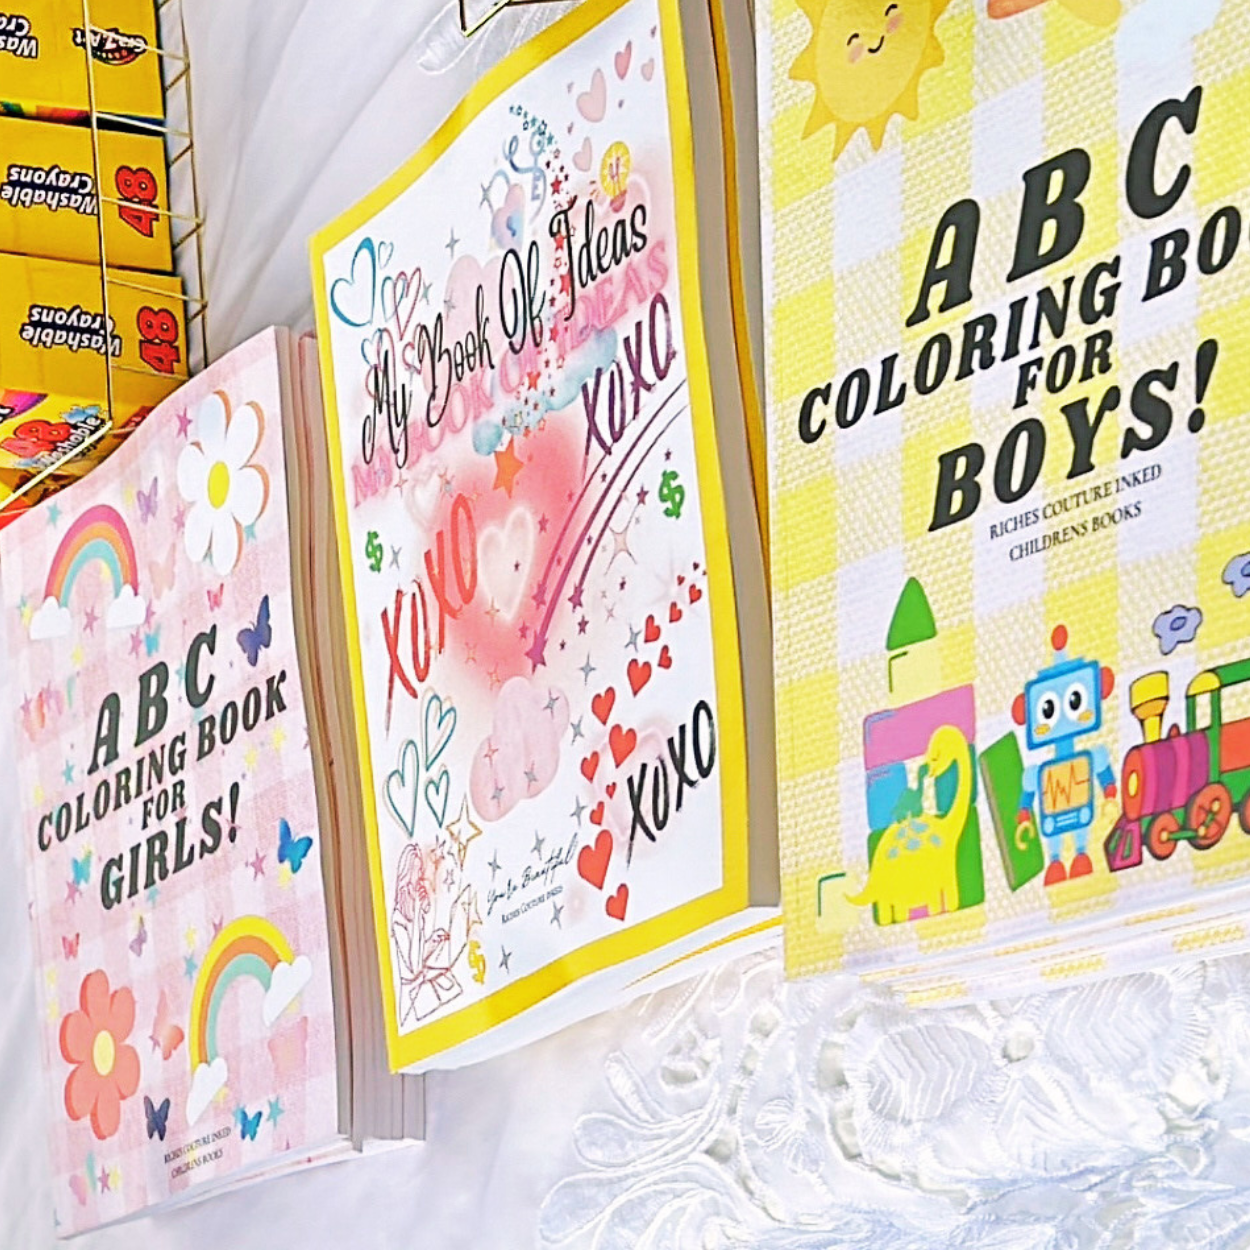 AMAZING BOYS! ABC COLORING BOOK with inspirational quotes on each page! Practice writing on each page!